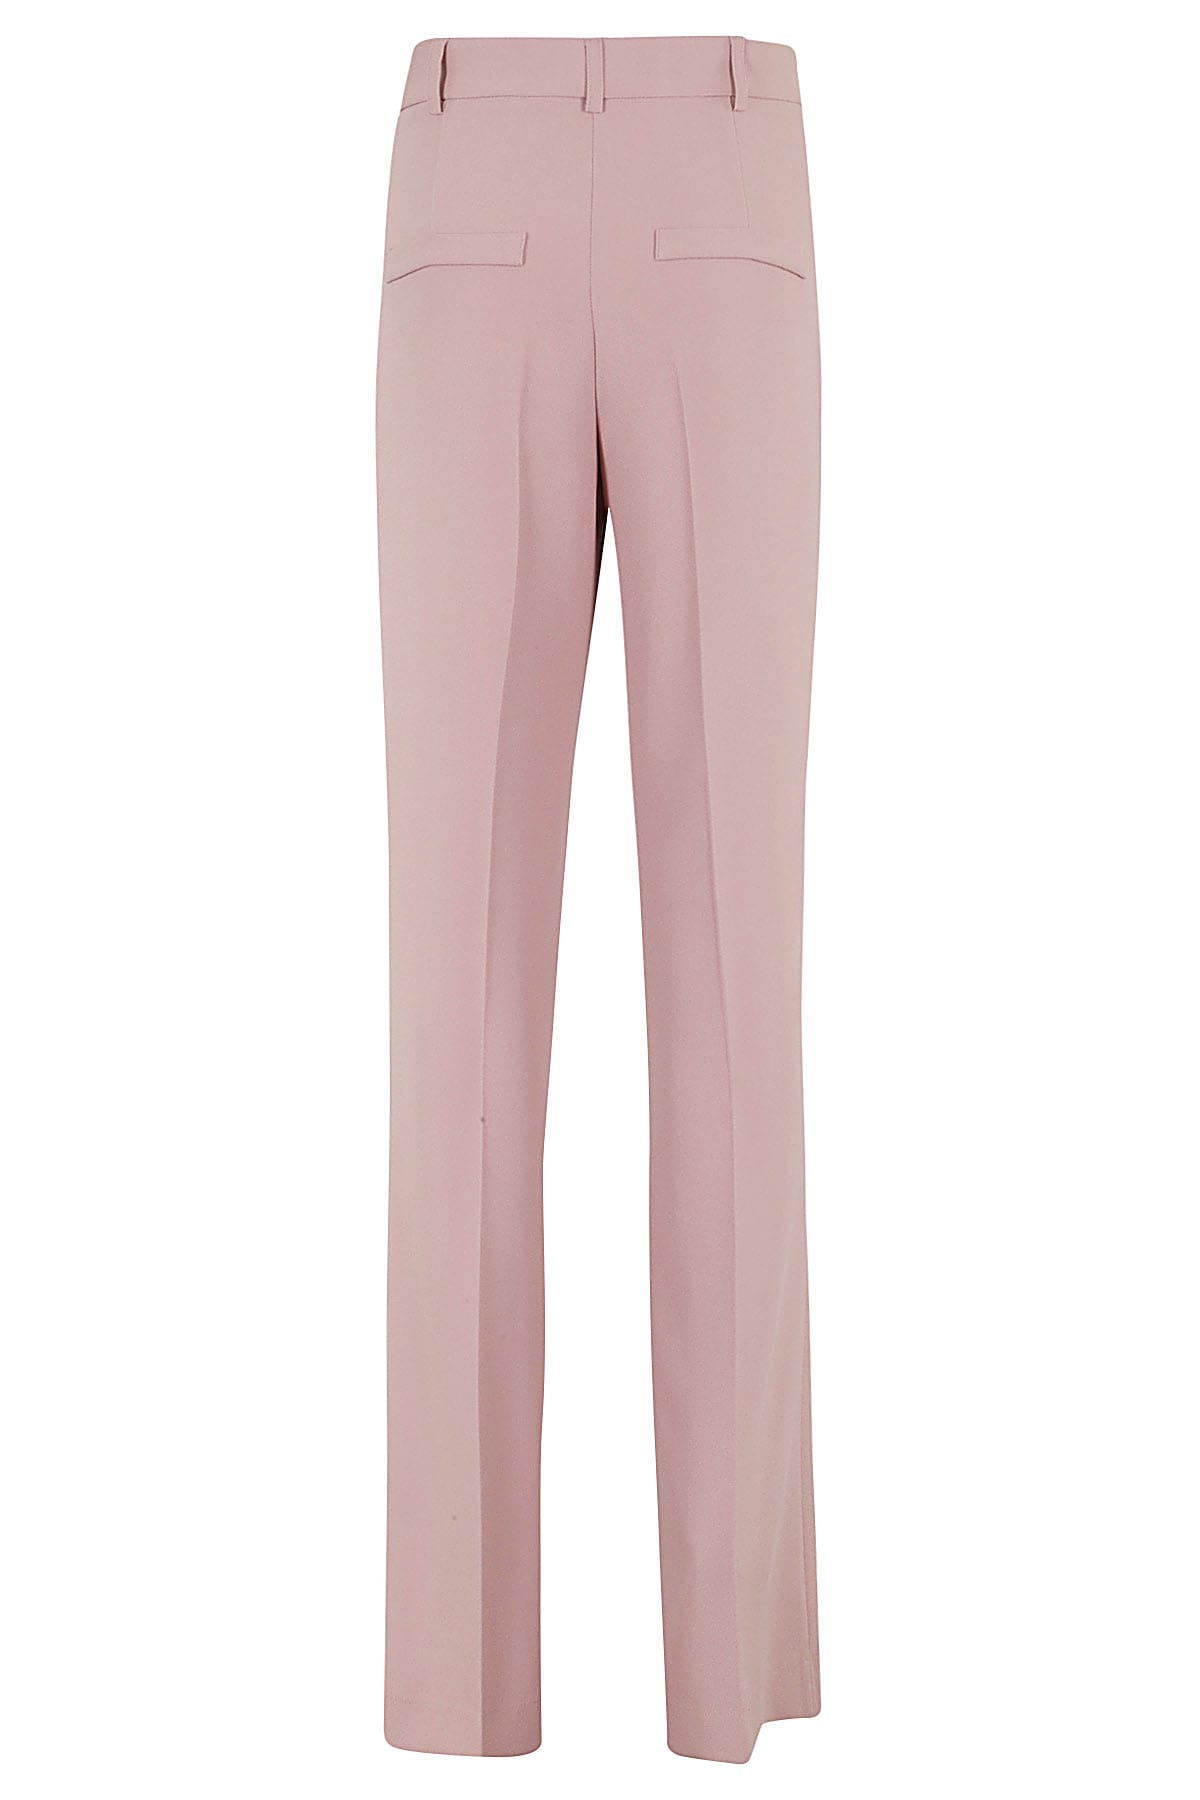 Shop Hebe Studio The Georgia Pant Cady In Powder Pink